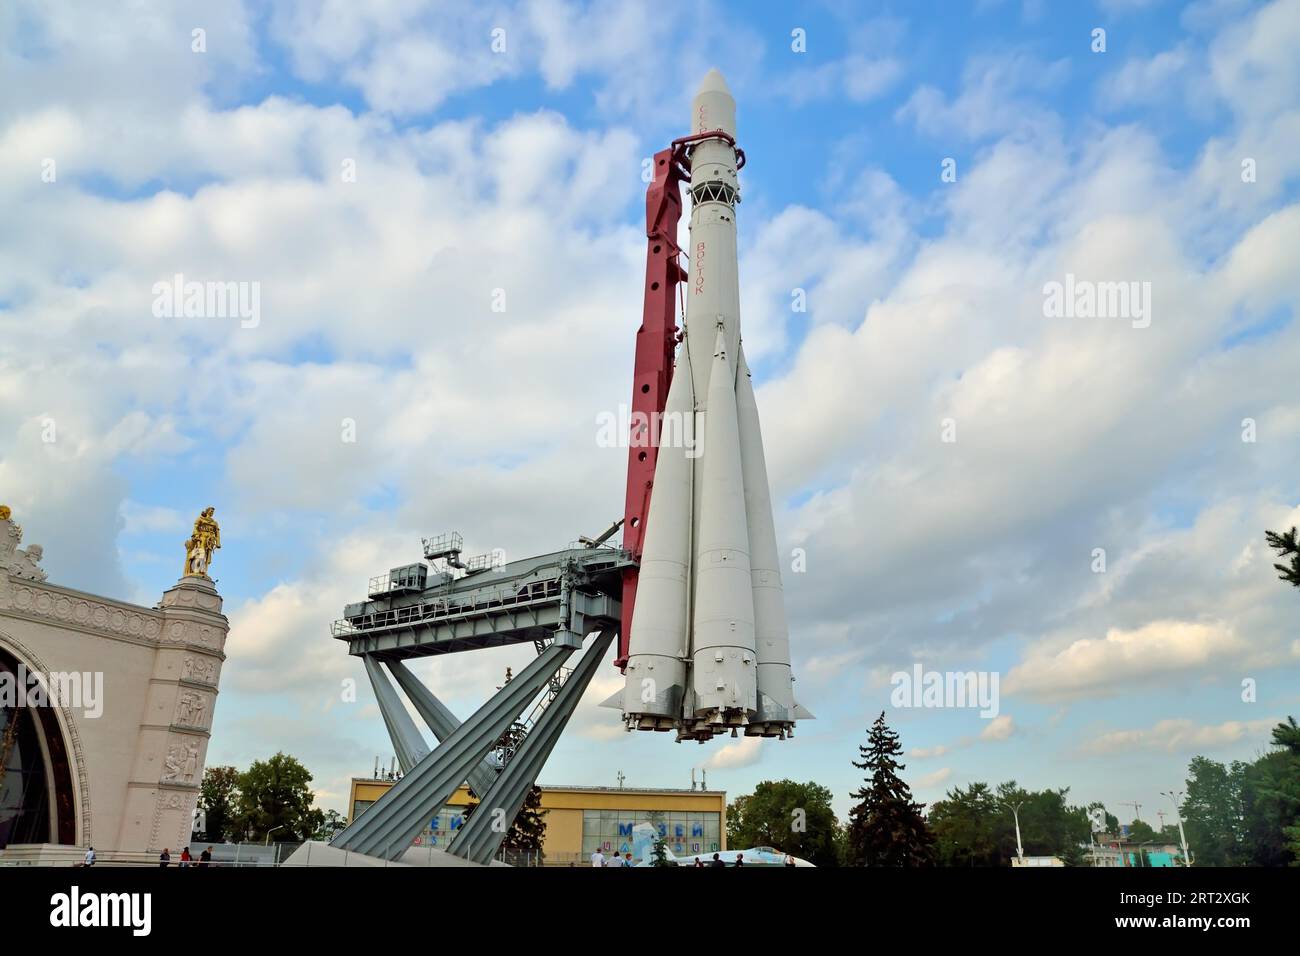 Moscow, Russia, august 12, 2019: Vostok rocket and launcher at the Exhibition of achievements of the national economy, All-Russian Exhibition Center Stock Photo